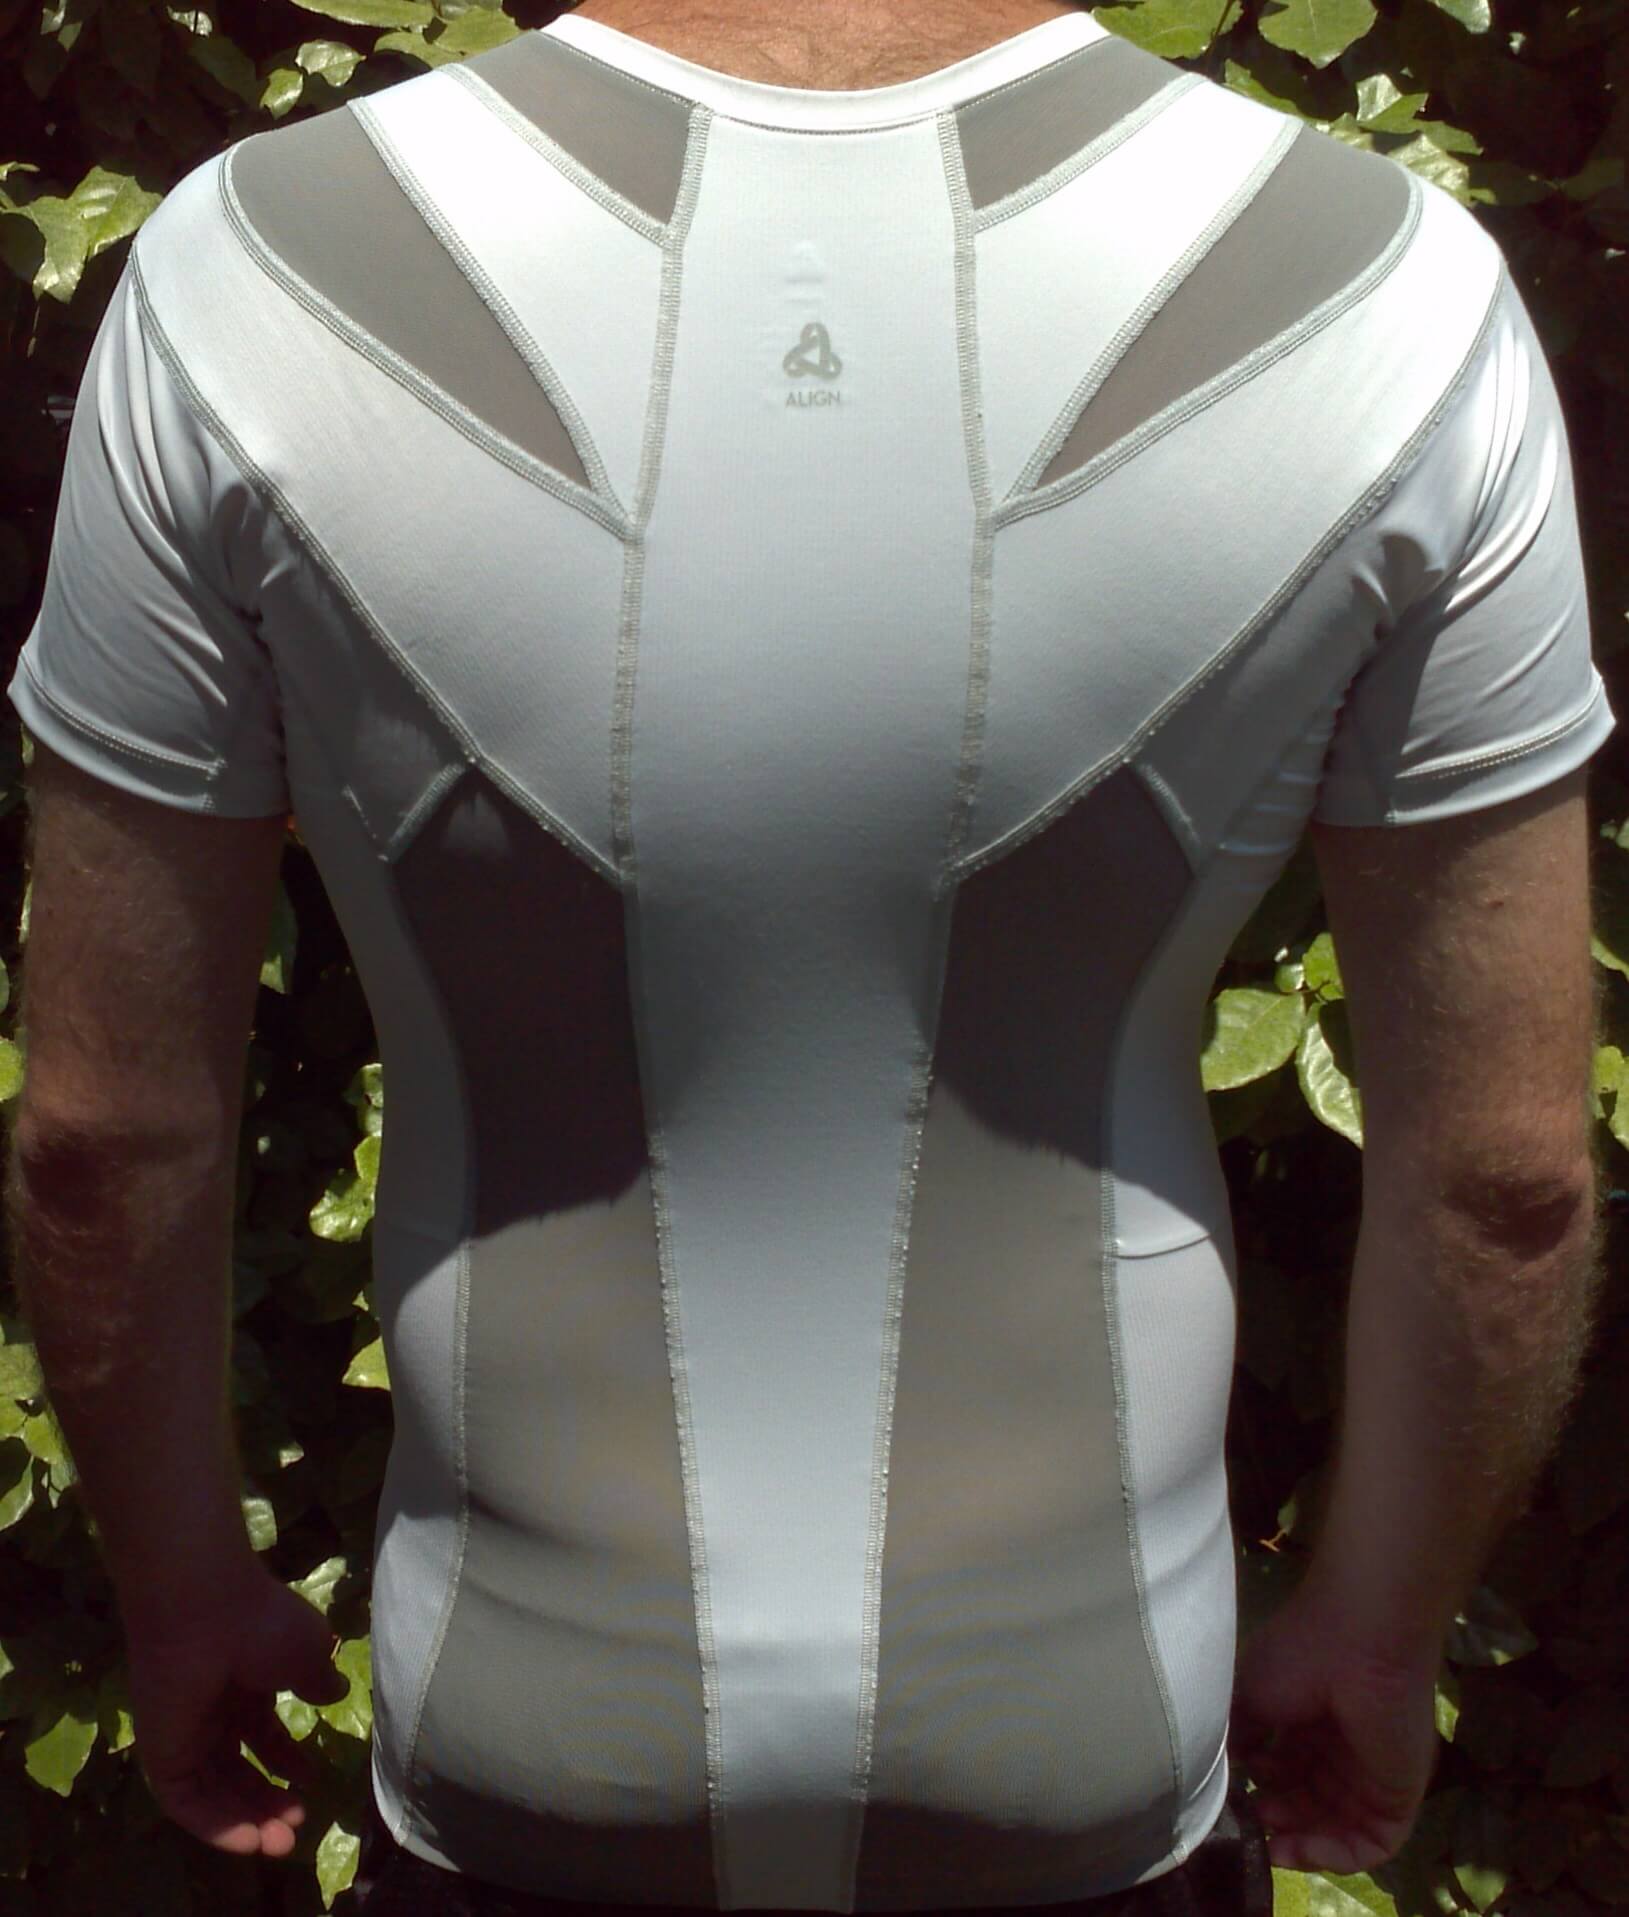 Alignmed Posture Shirt 2.0 Review